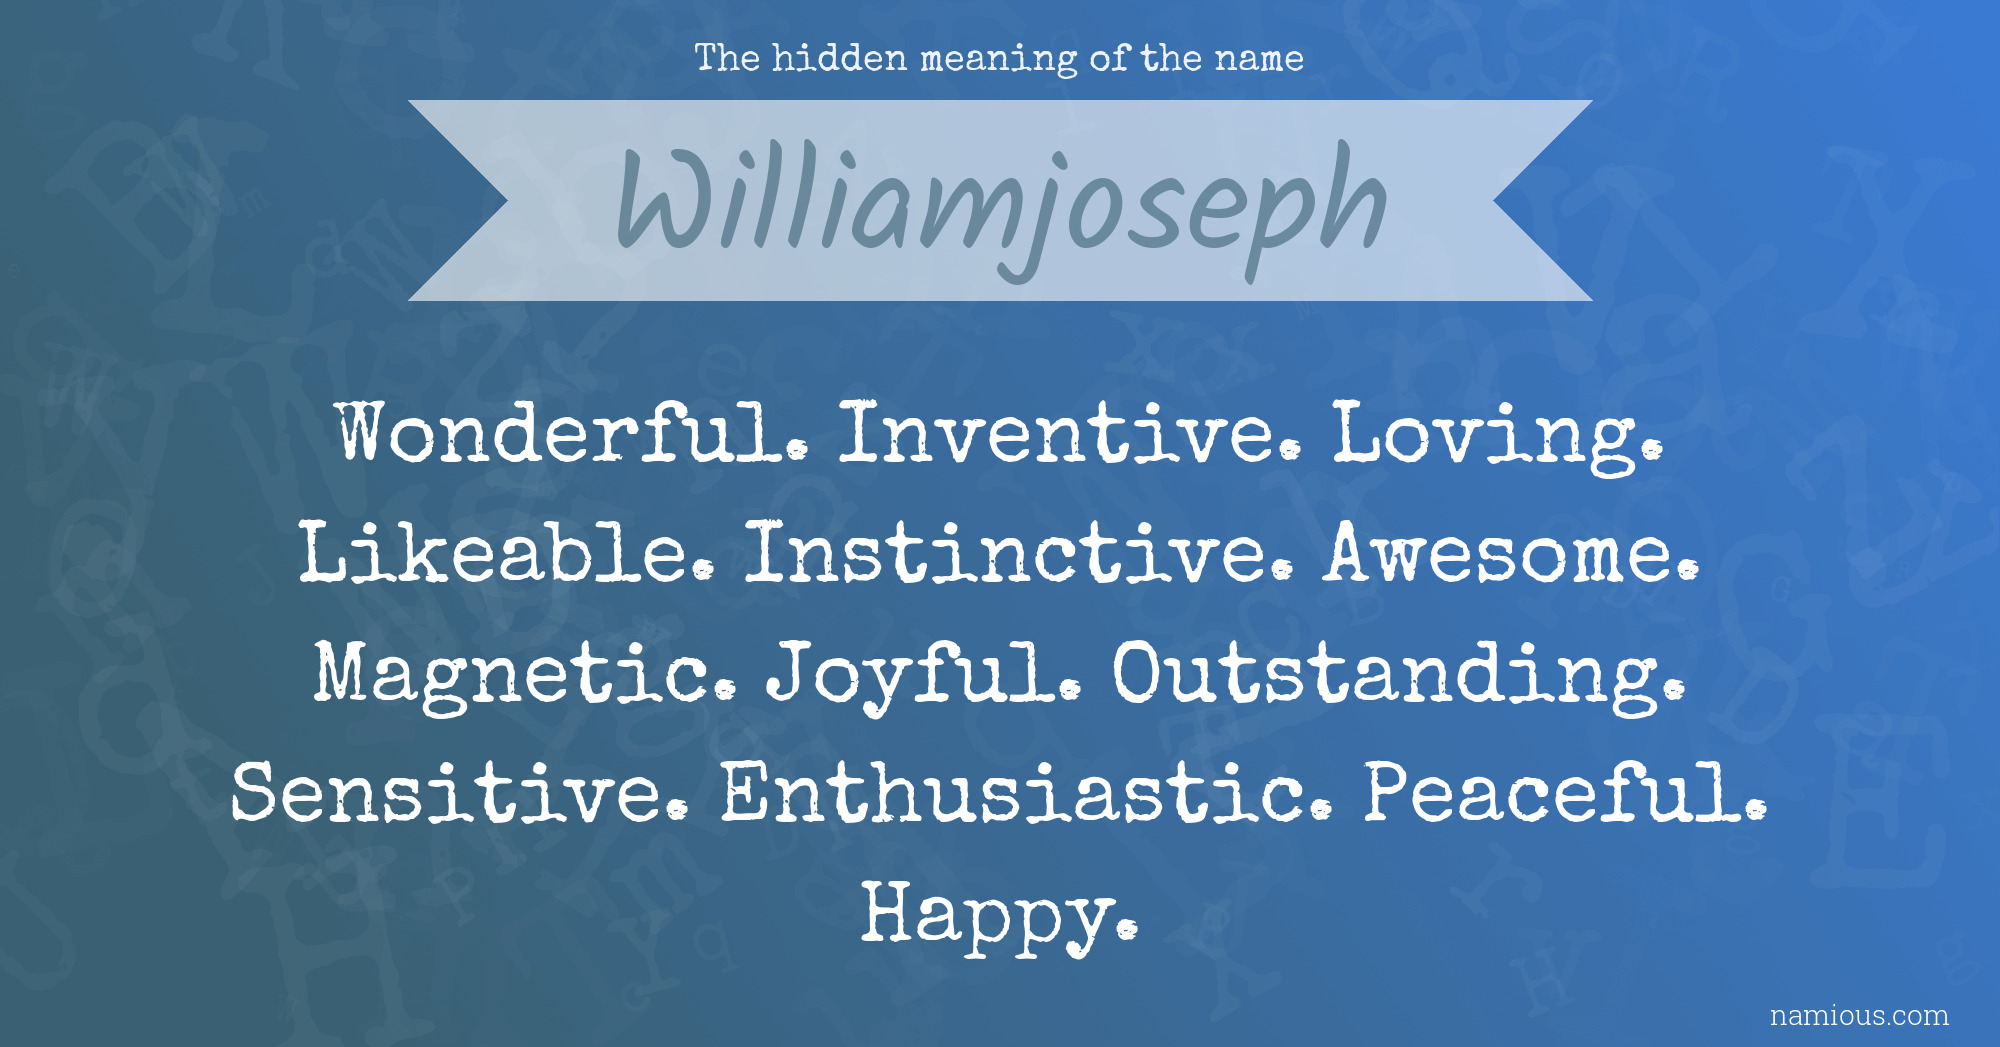 The hidden meaning of the name Williamjoseph